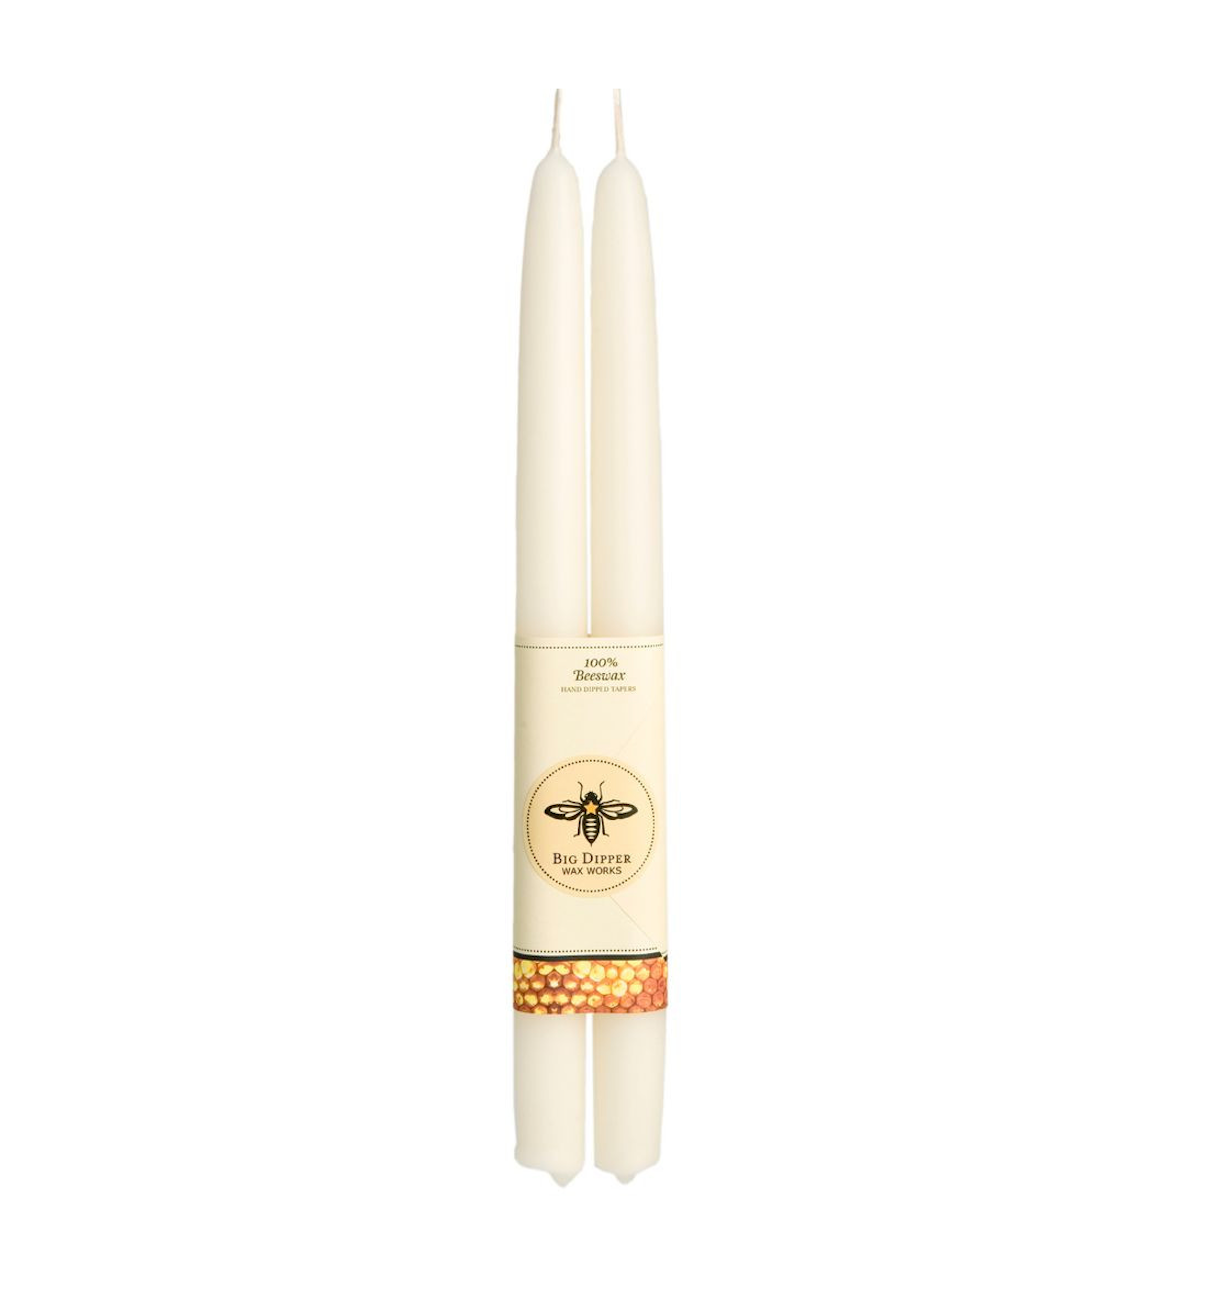 100% Pure Beeswax Tapers by Big Dipper